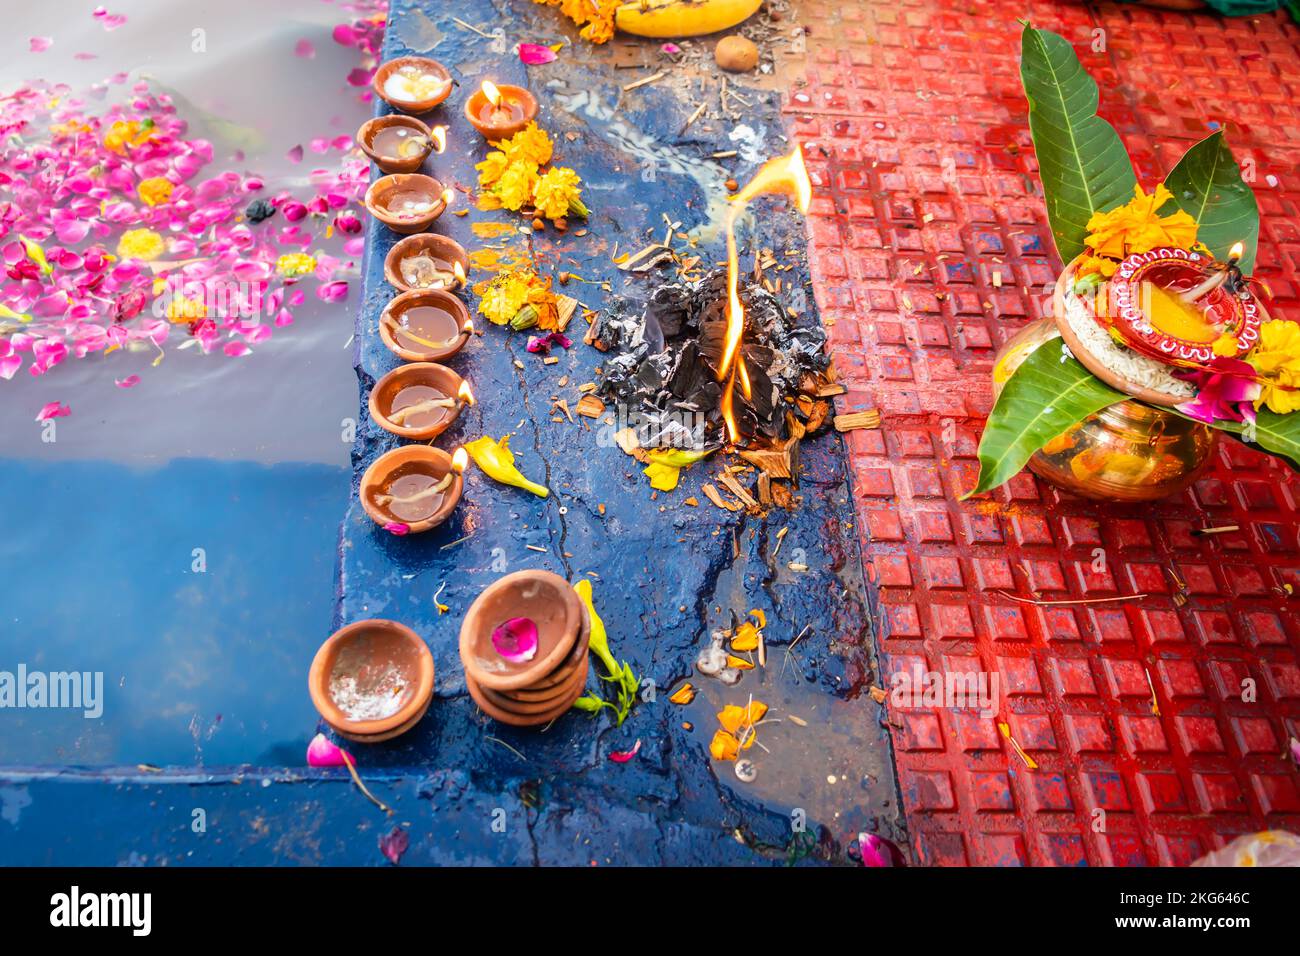 homa or havan at river shore in india for Hindu religious rituals for god during festival Stock Photo